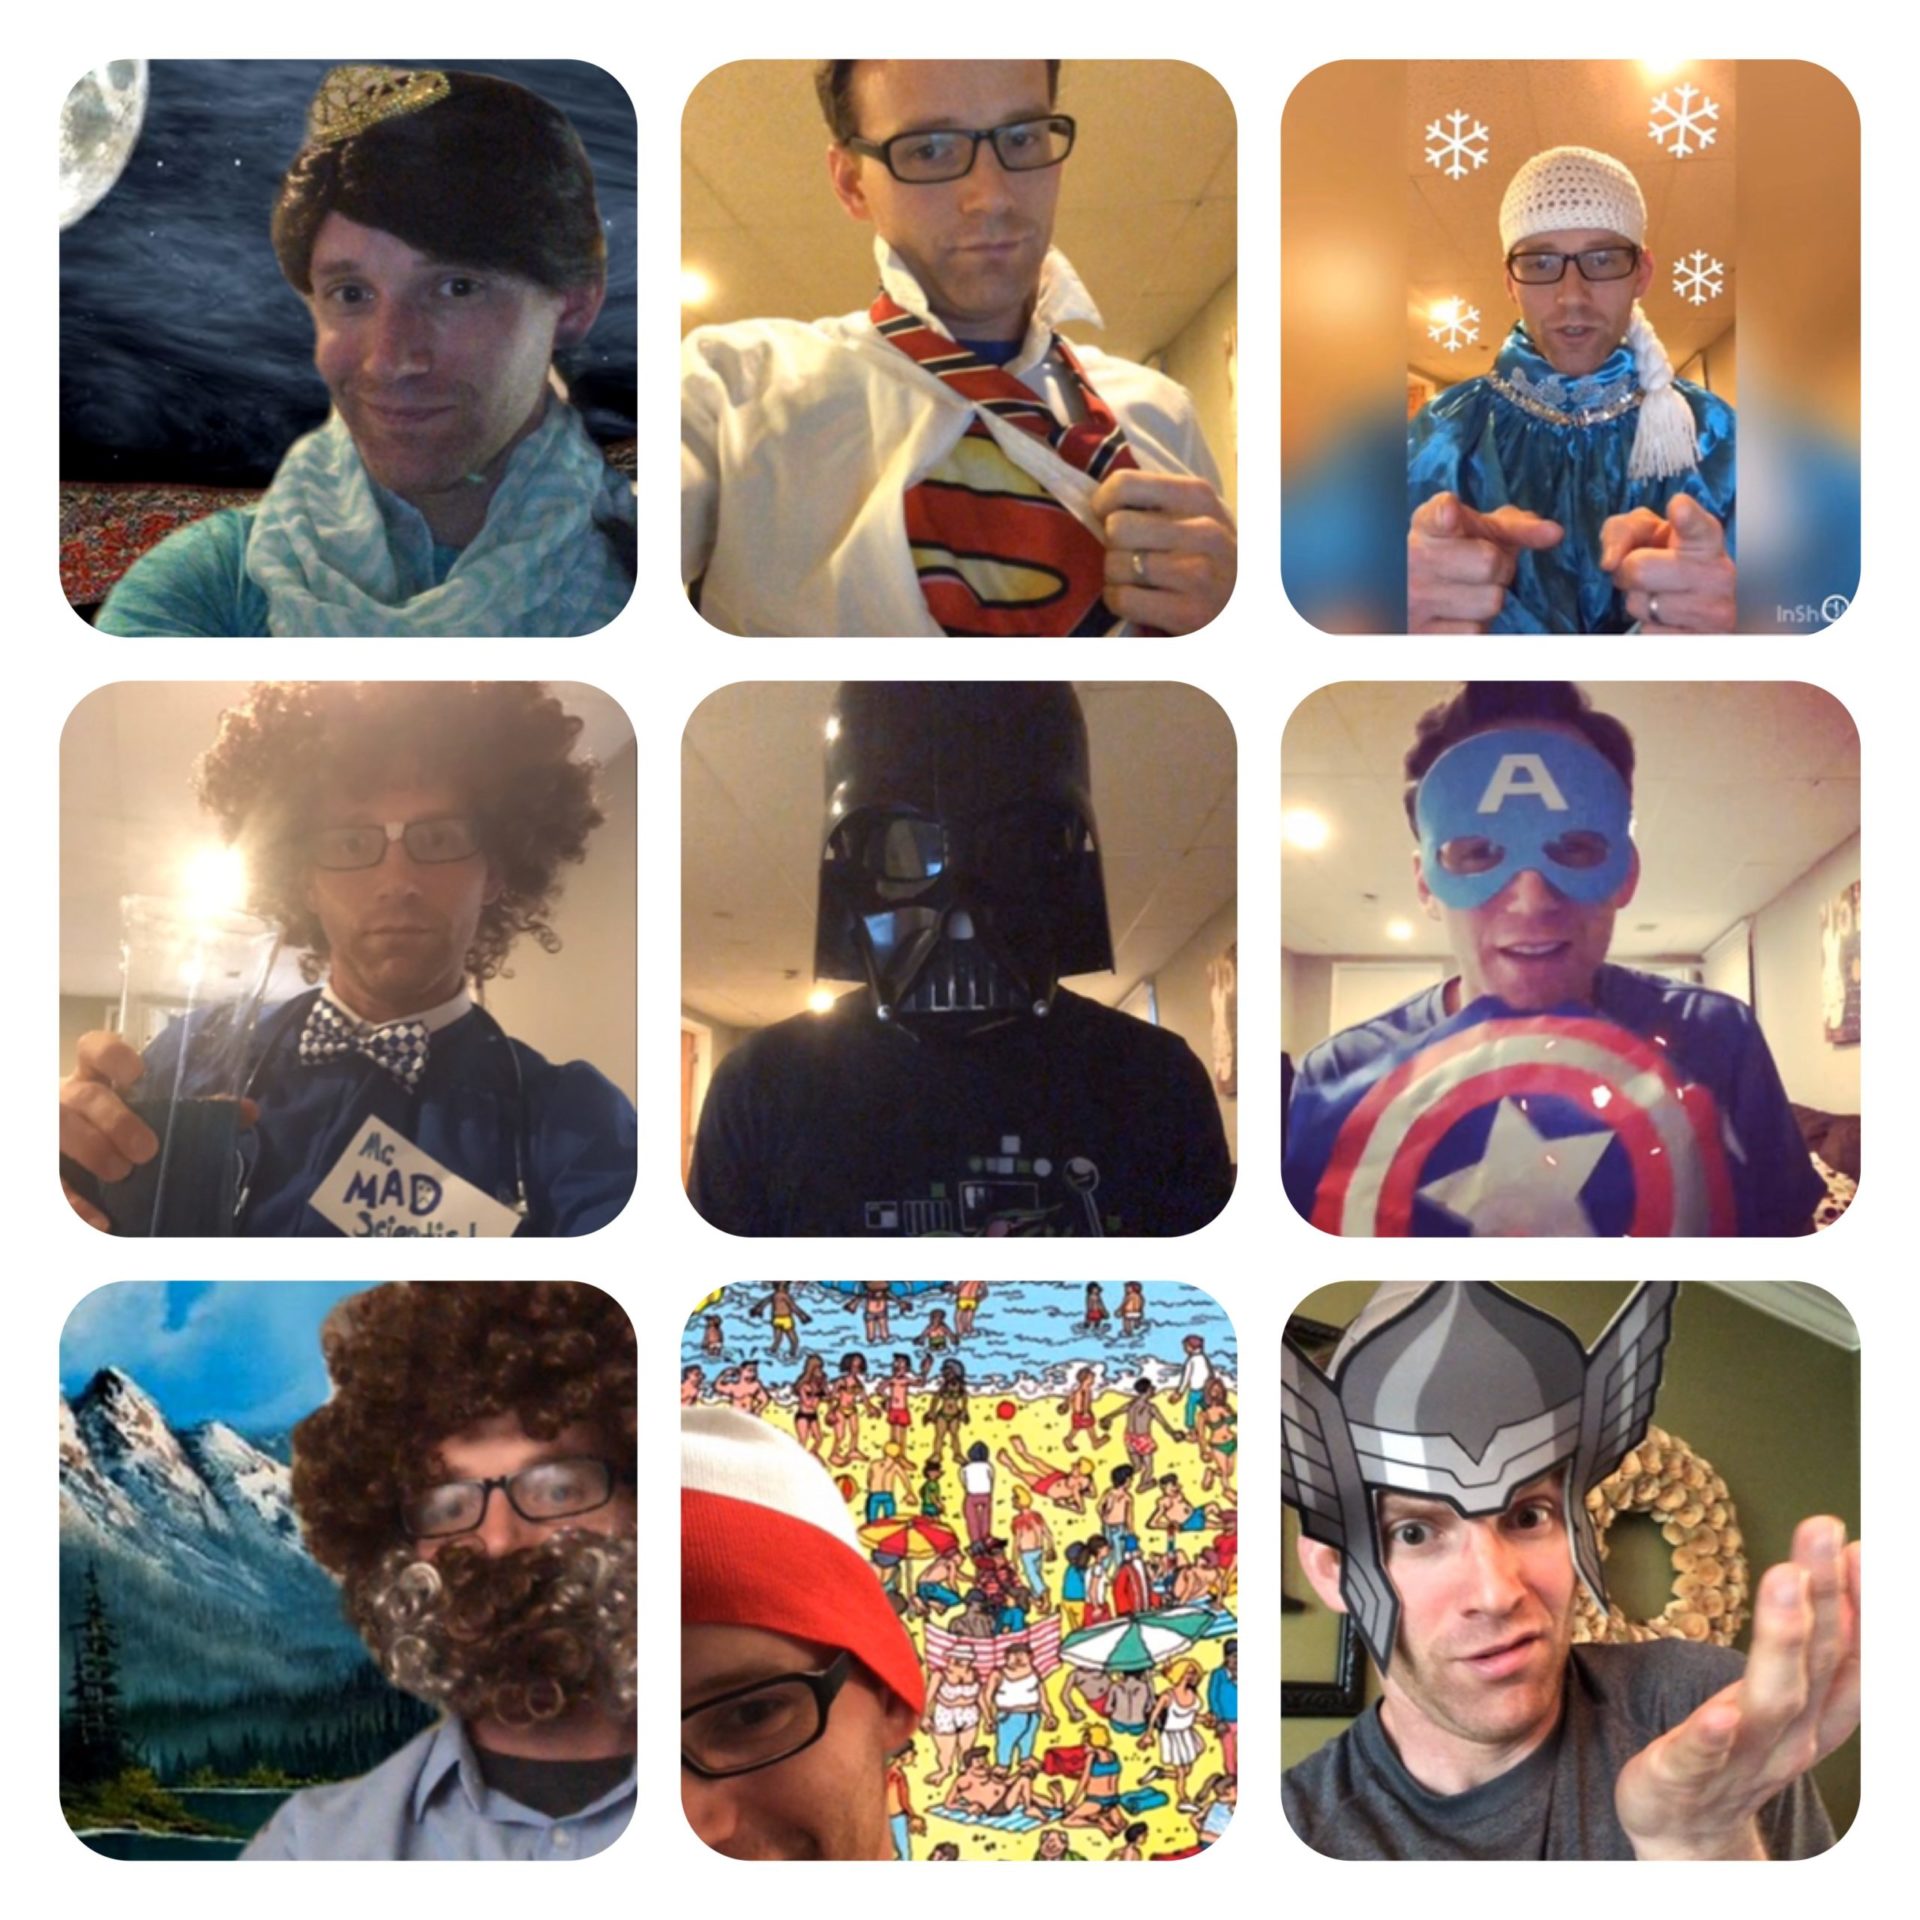 A collage featuring a man in various costumes and poses, including superhero outfits and a scenic mountain background, ideal for science students.